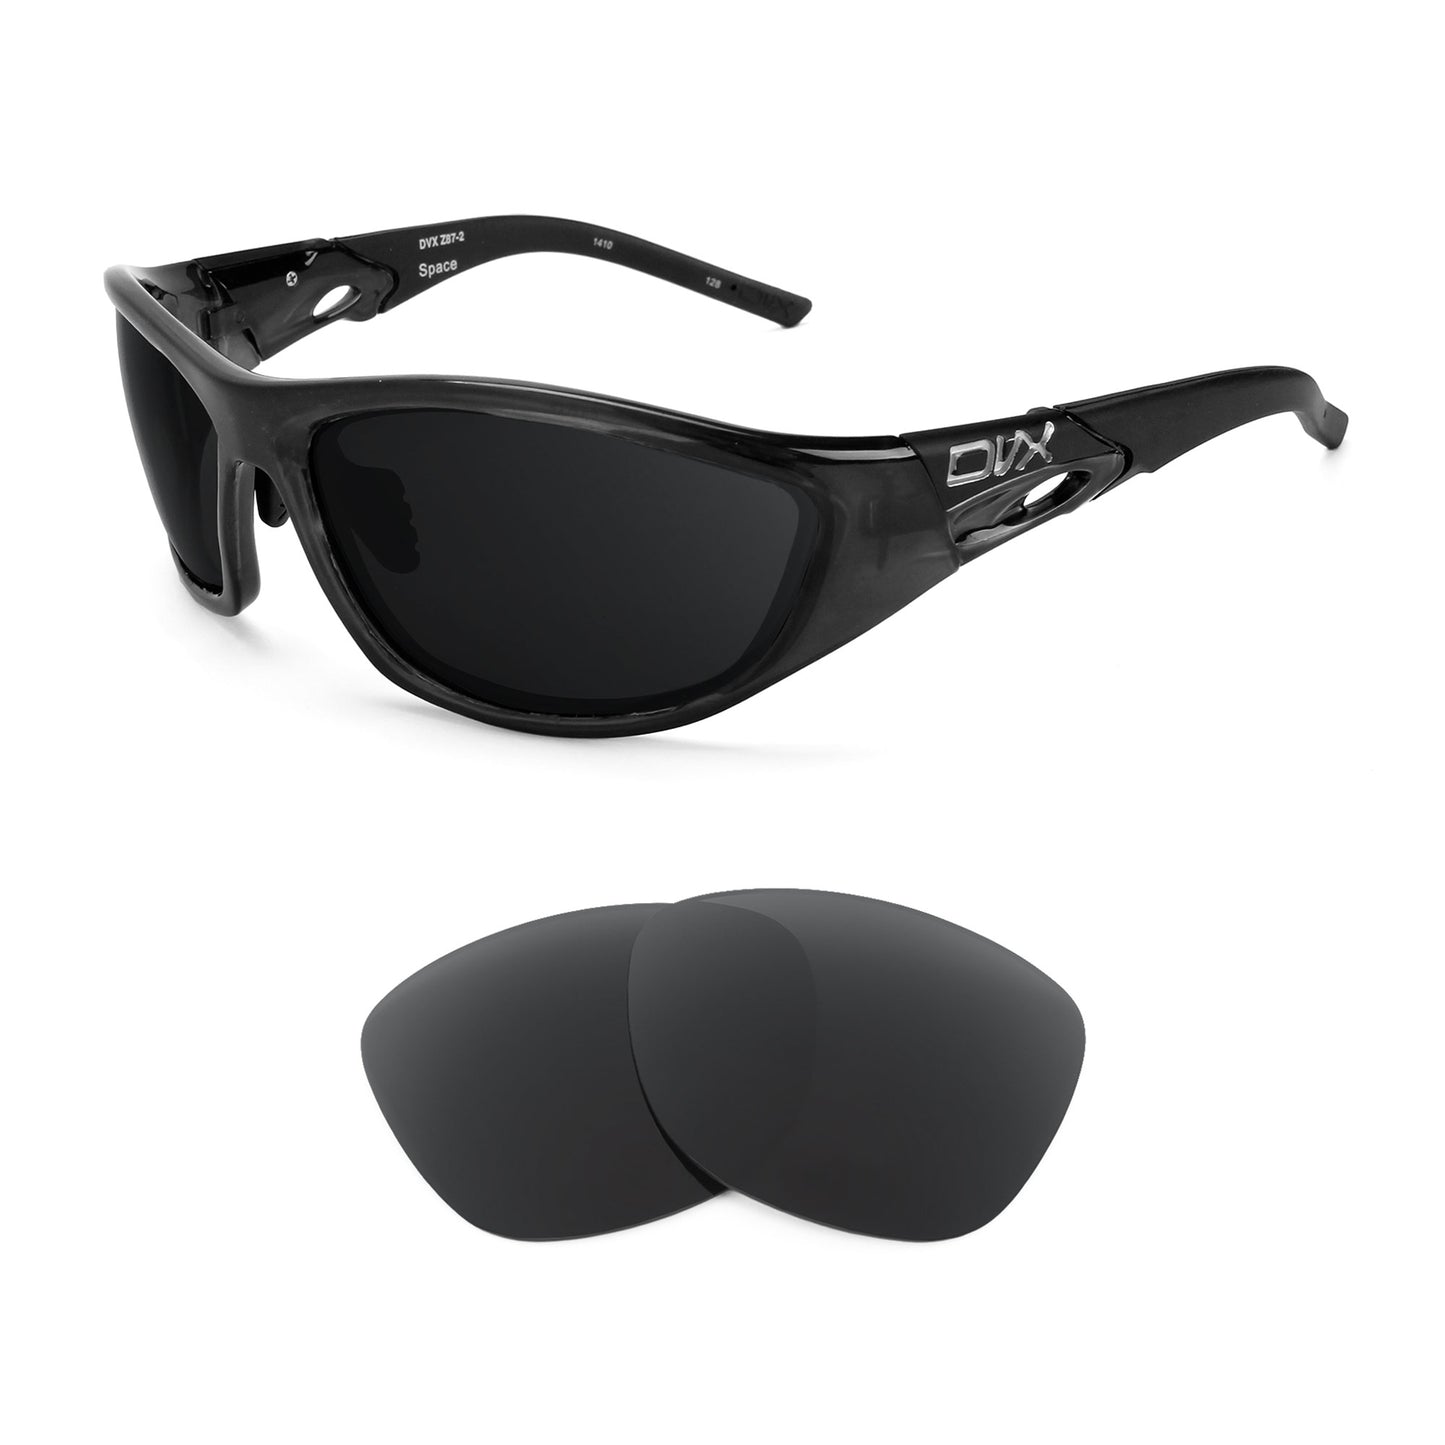 DVX Eyewear Space sunglasses with replacement lenses